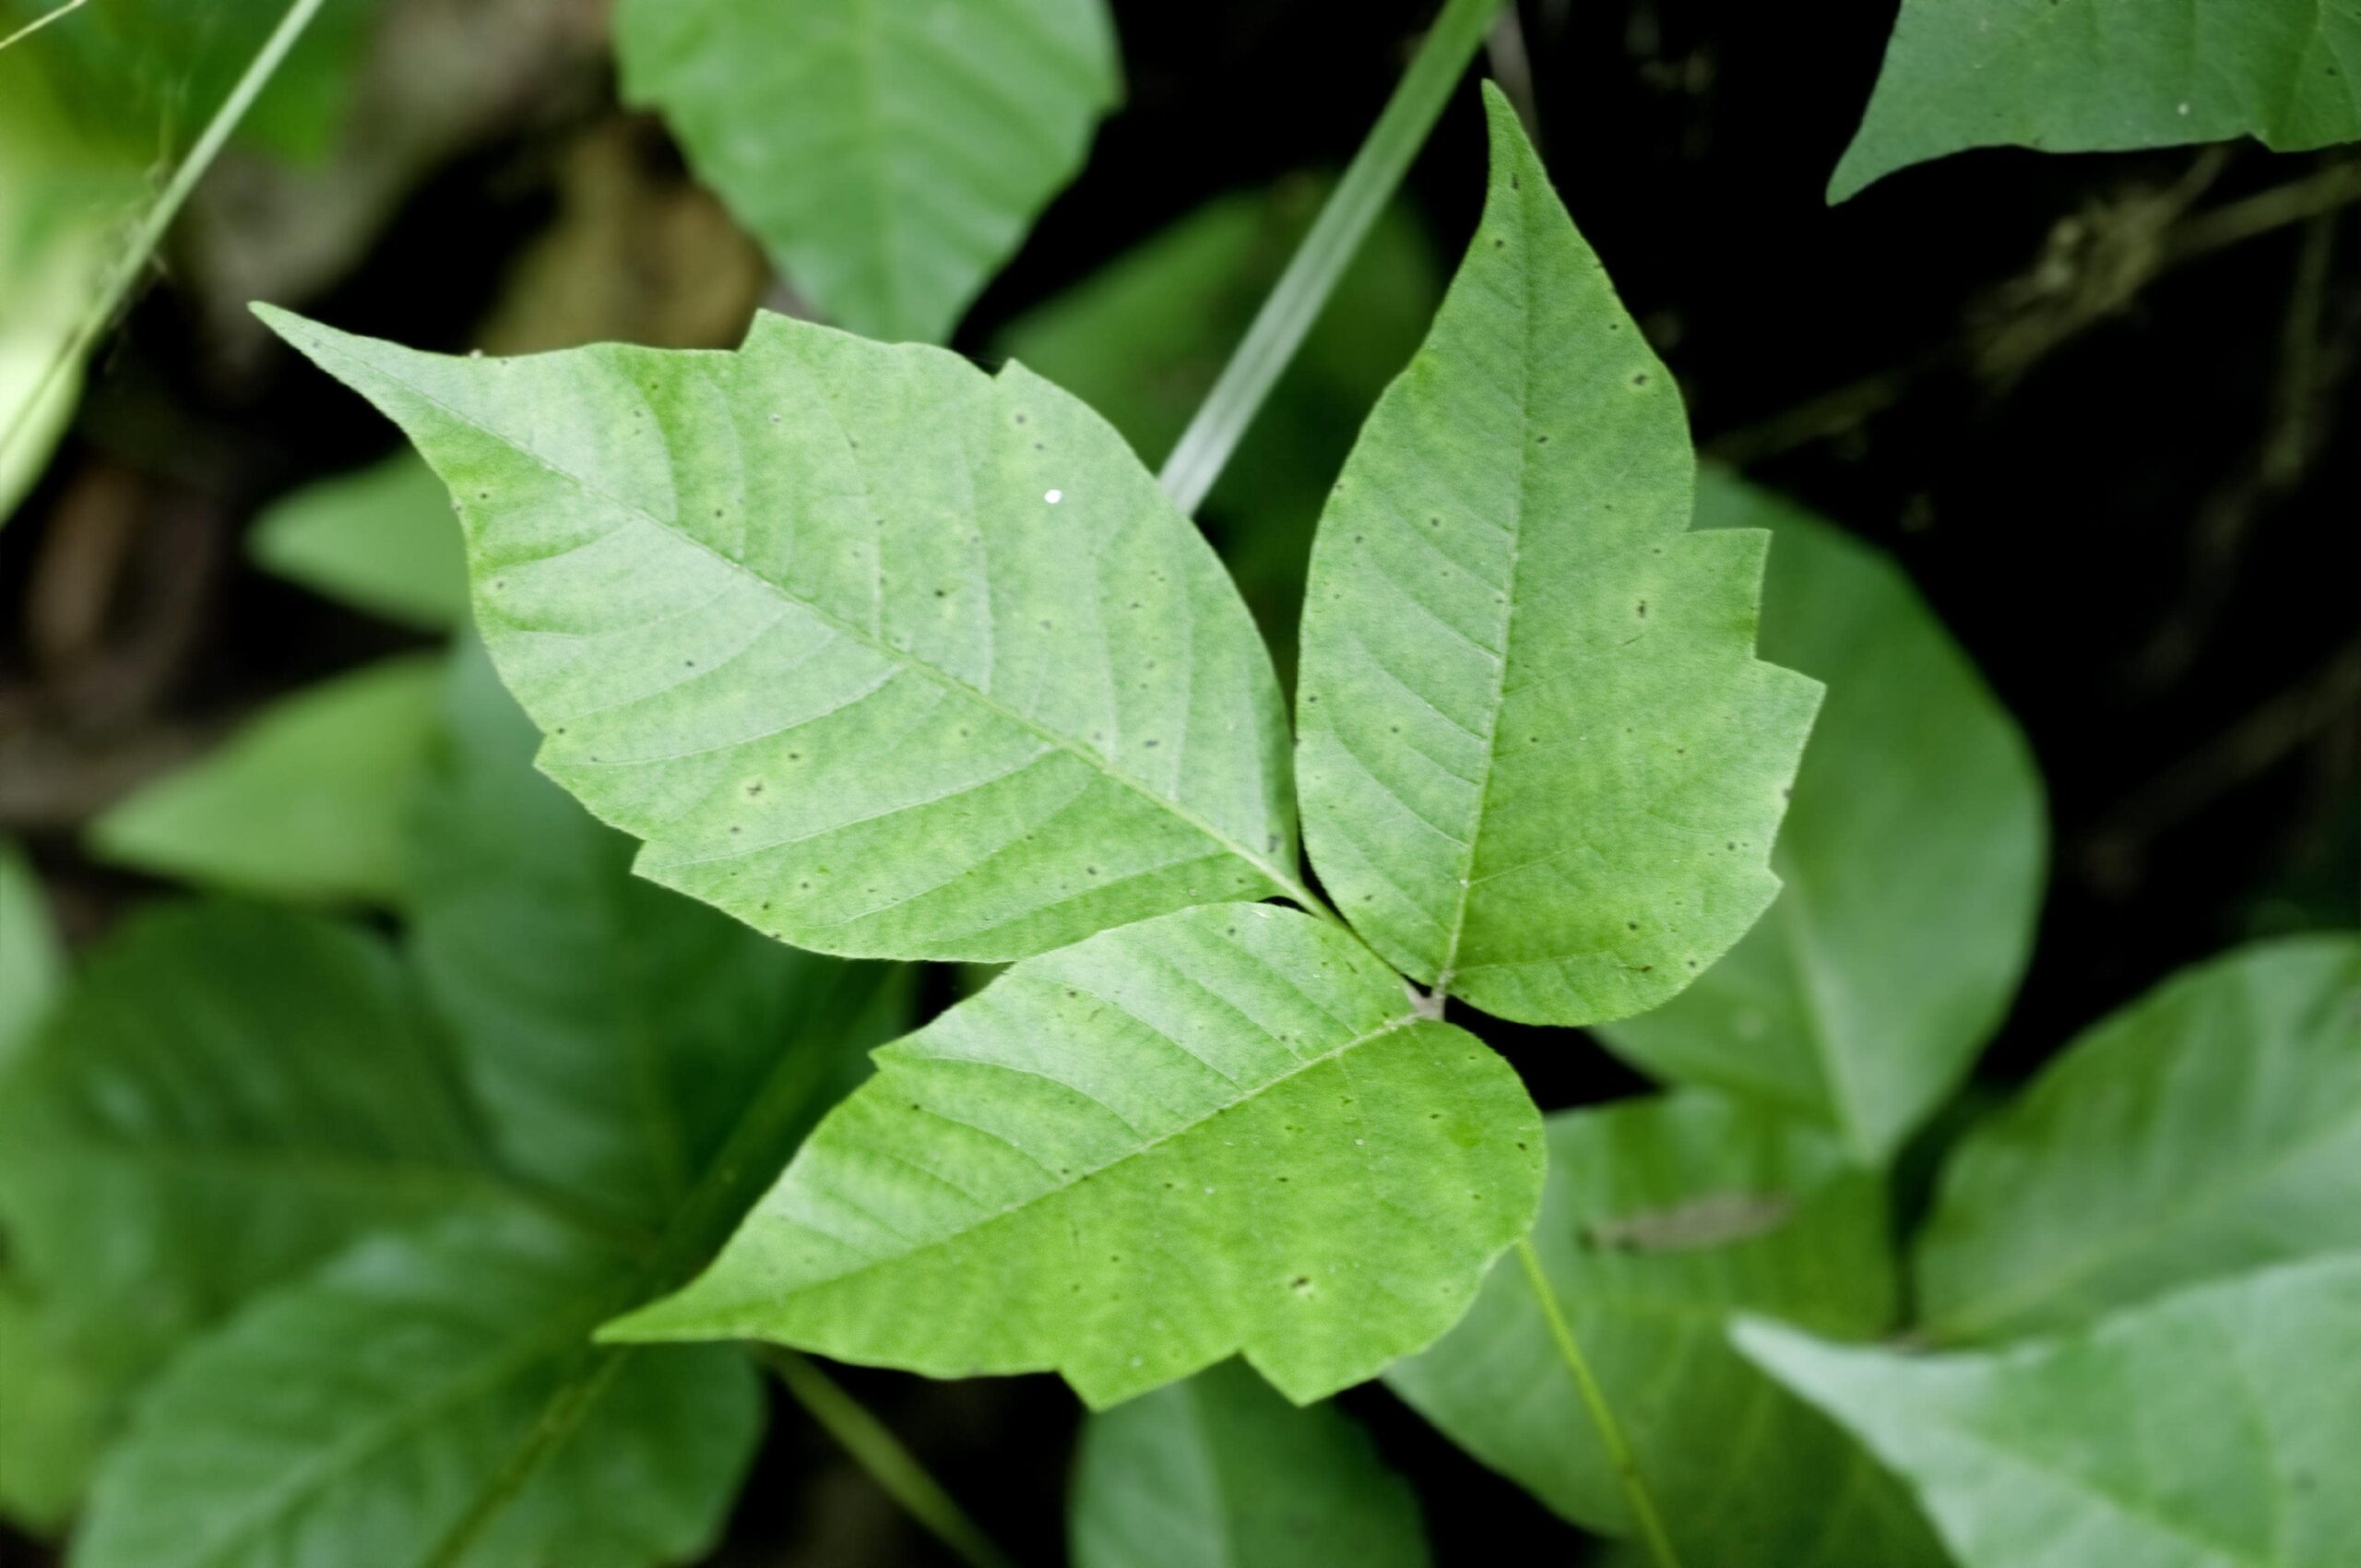 How To Kill Poison Ivy - Find Out What Is The Best Way To Get Rid